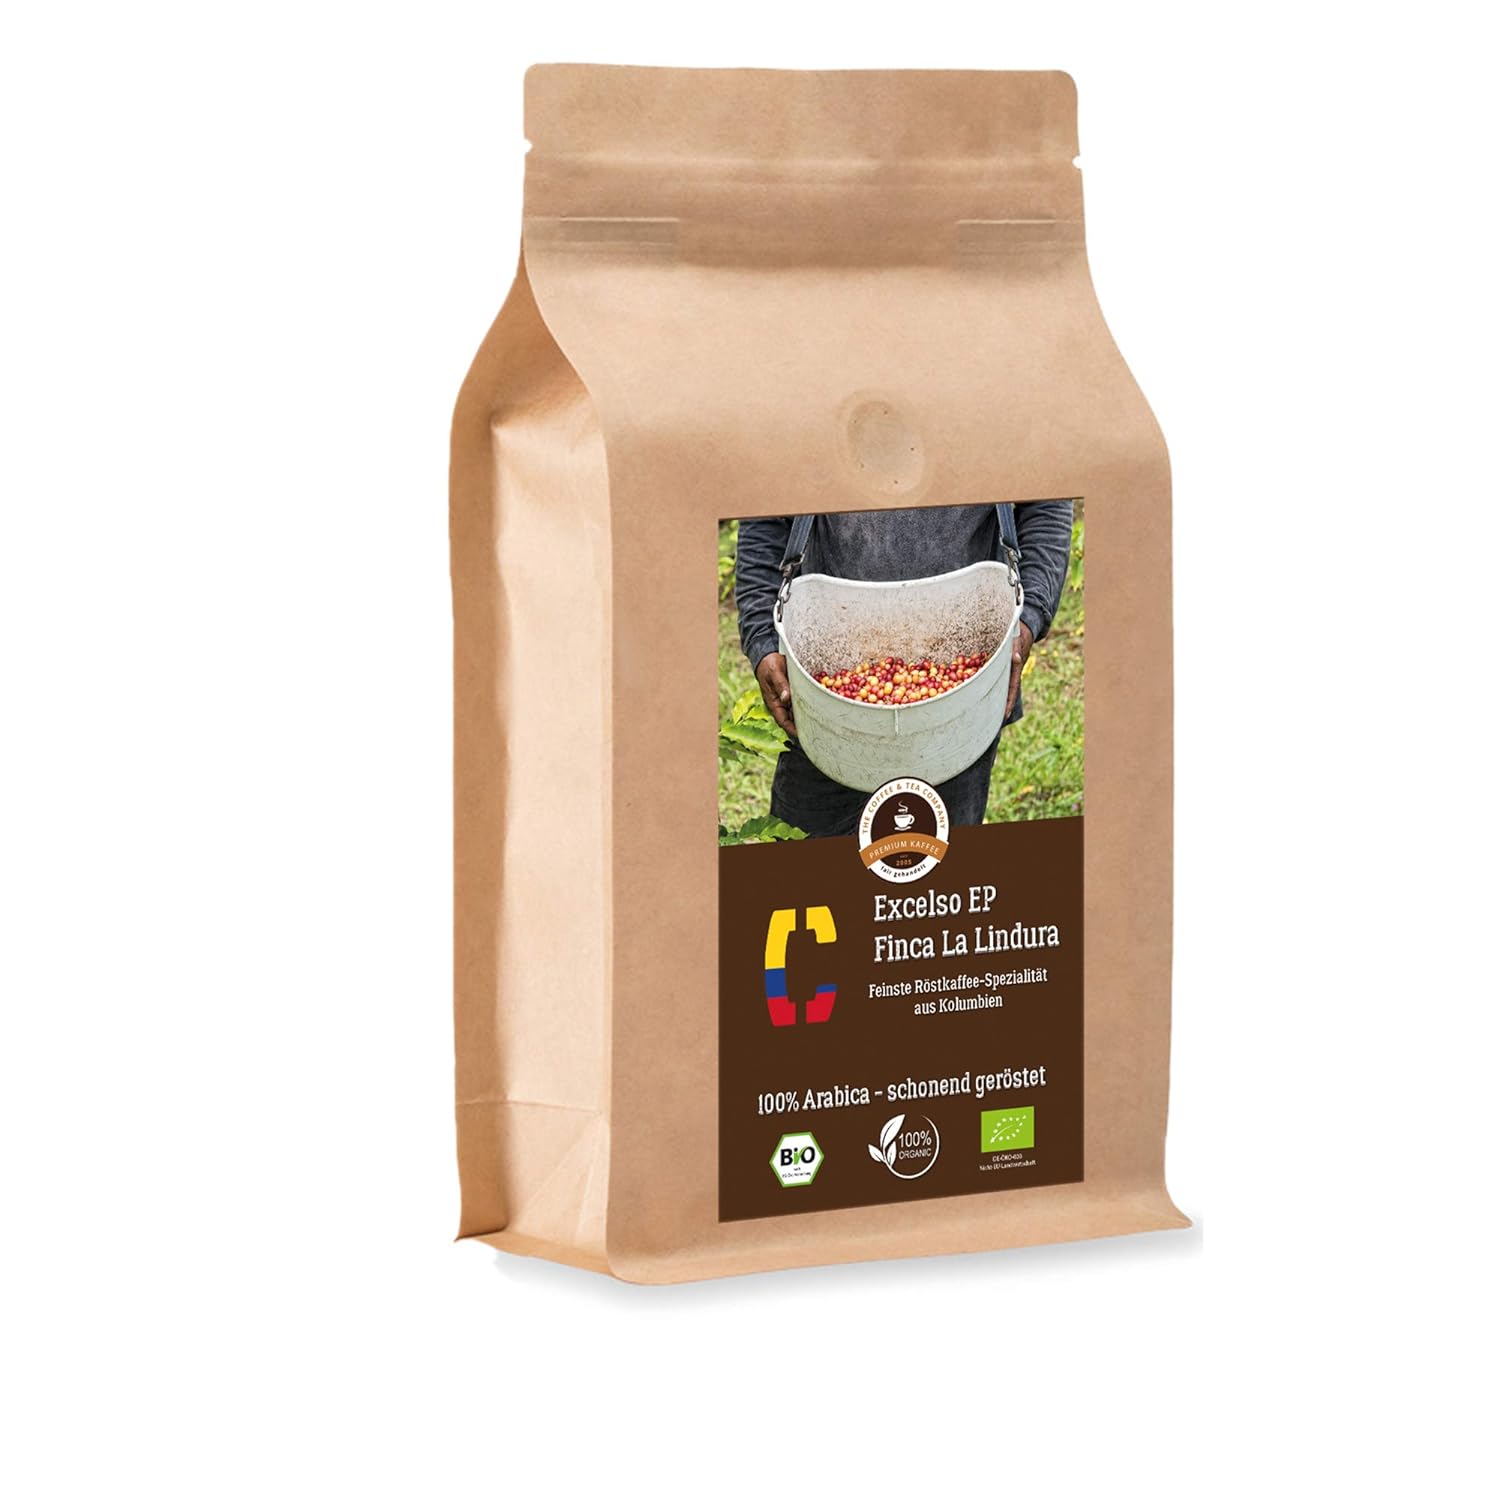 Coffee Globetrotter - Bio Colombia Excelso EP Finca la Lindura - 500 g Very Fine Ground - for Fully Automatic Coffee Grinder, Hand Mill - Top Coffee - Roasted Coffee from Organic Cultivation